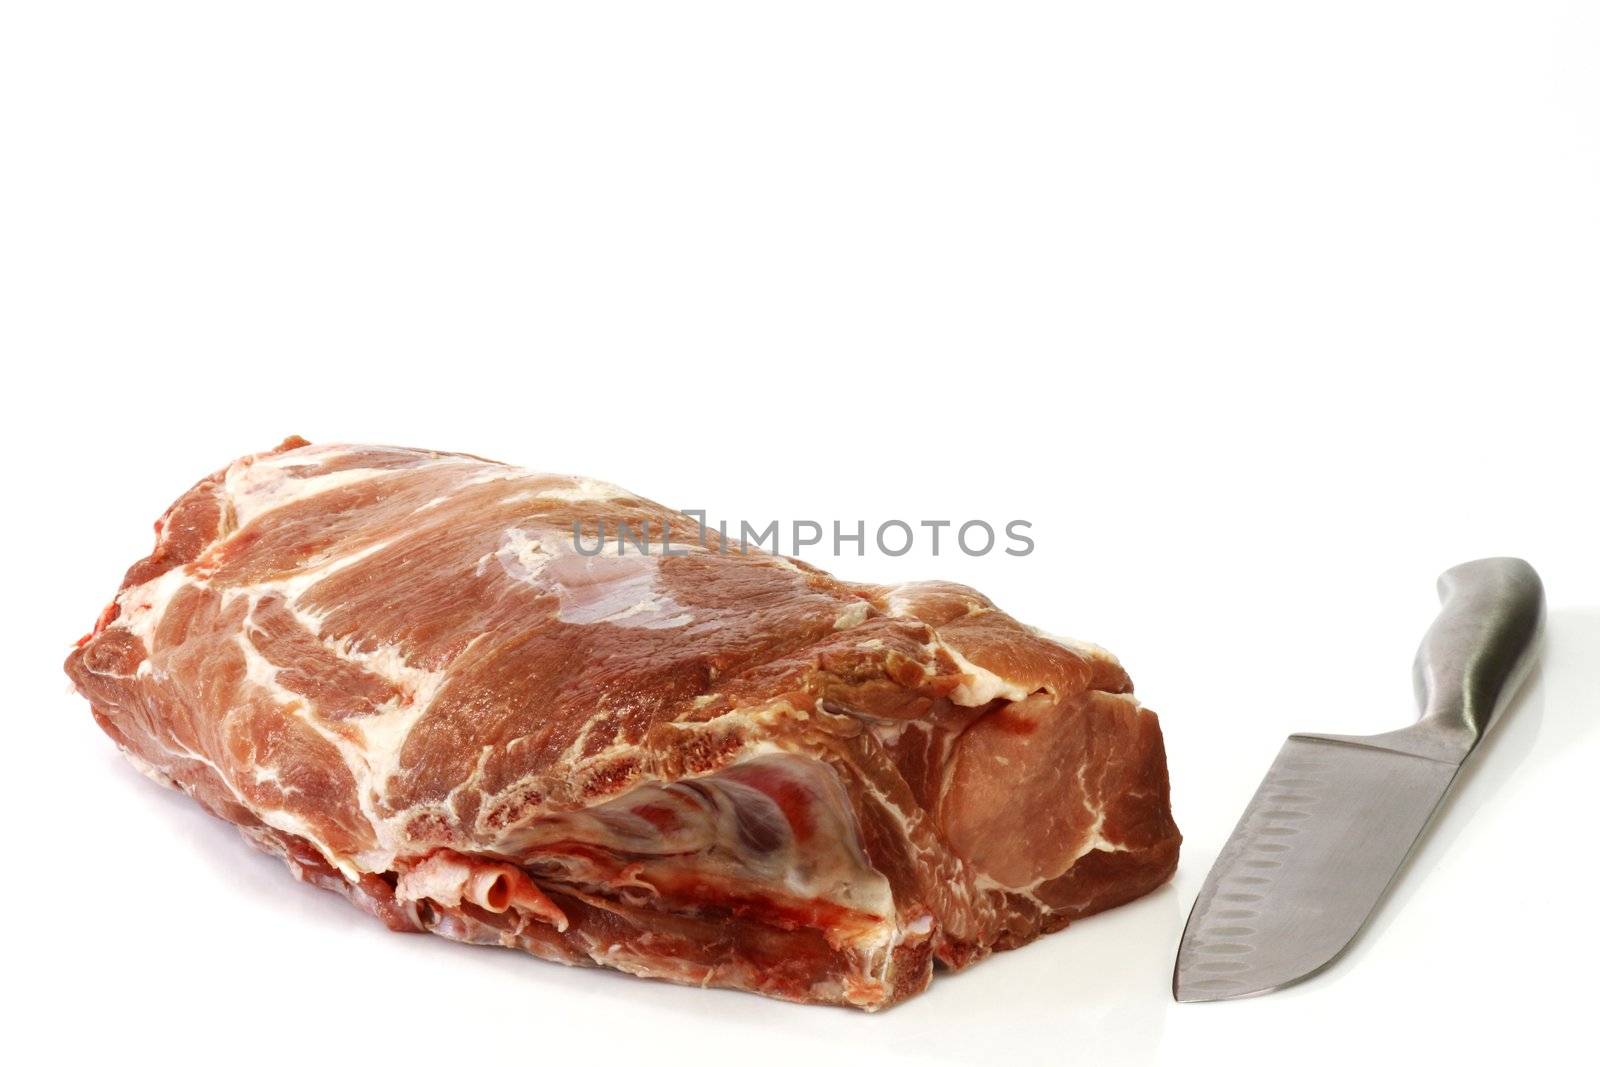 Raw pork roast with knife - isolated over white background